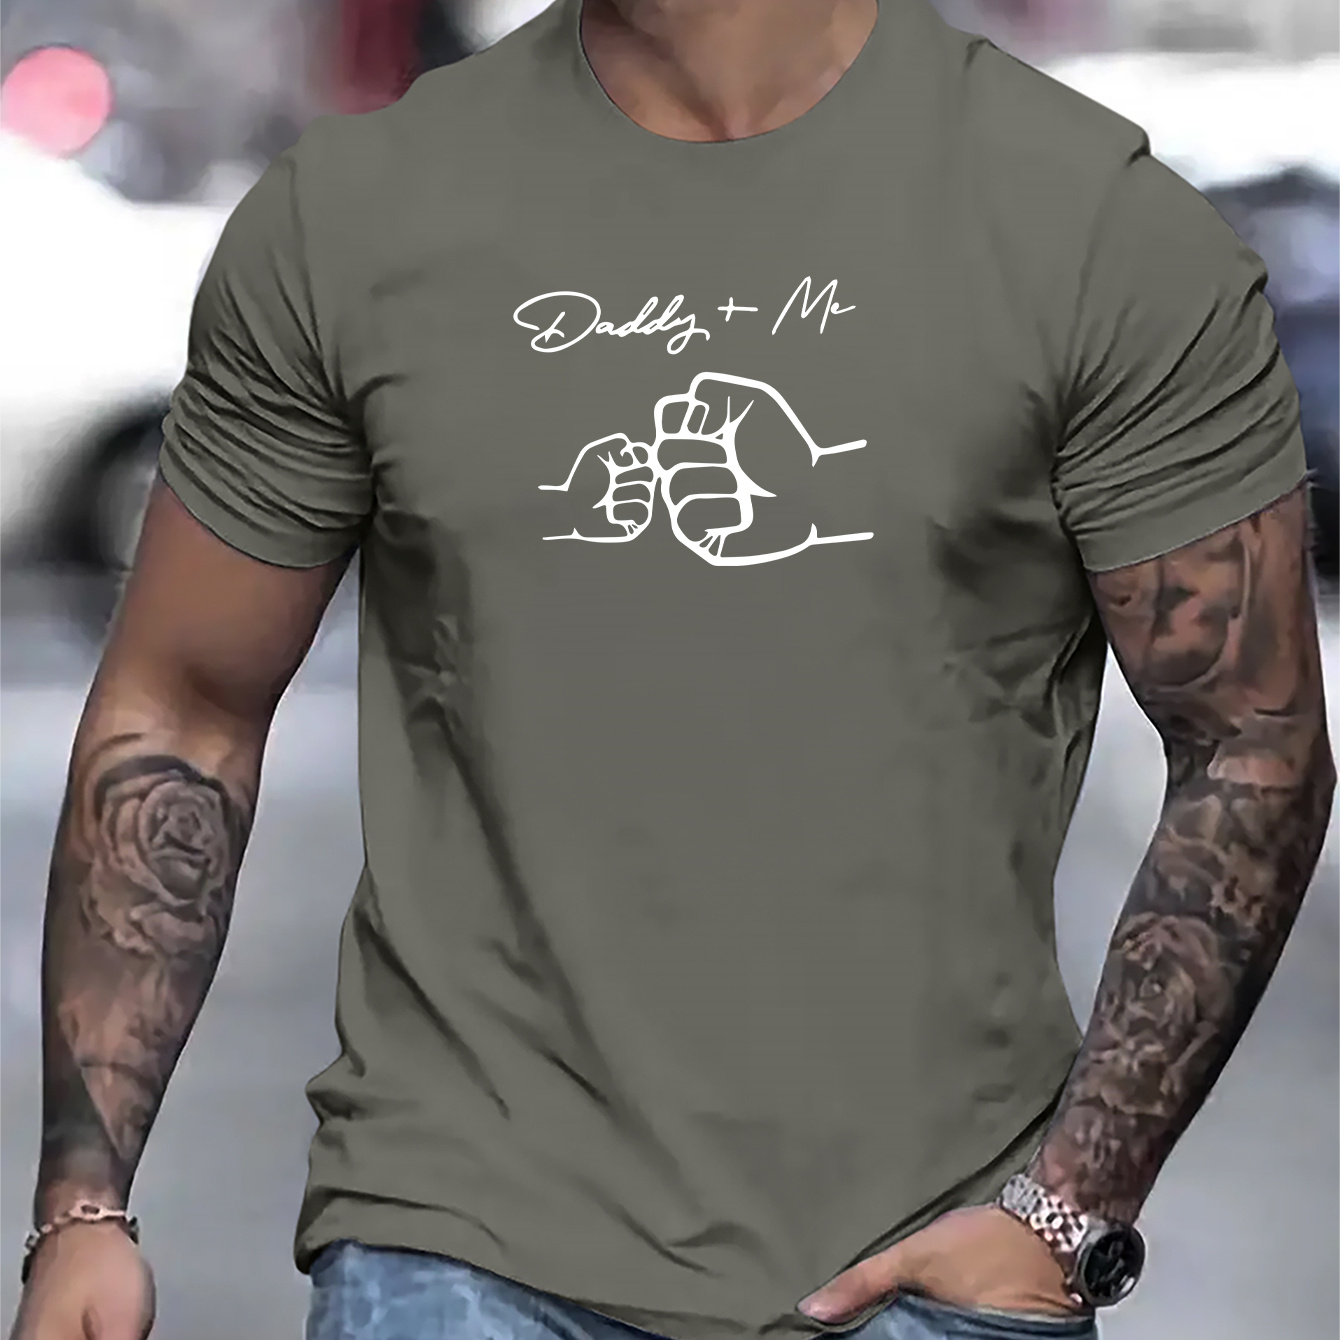 

Dad+me Letter And Fist Graphic Print Men's Creative Top, Casual Short Sleeve Crew Neck T-shirt, Men's Clothing For Summer Outdoor